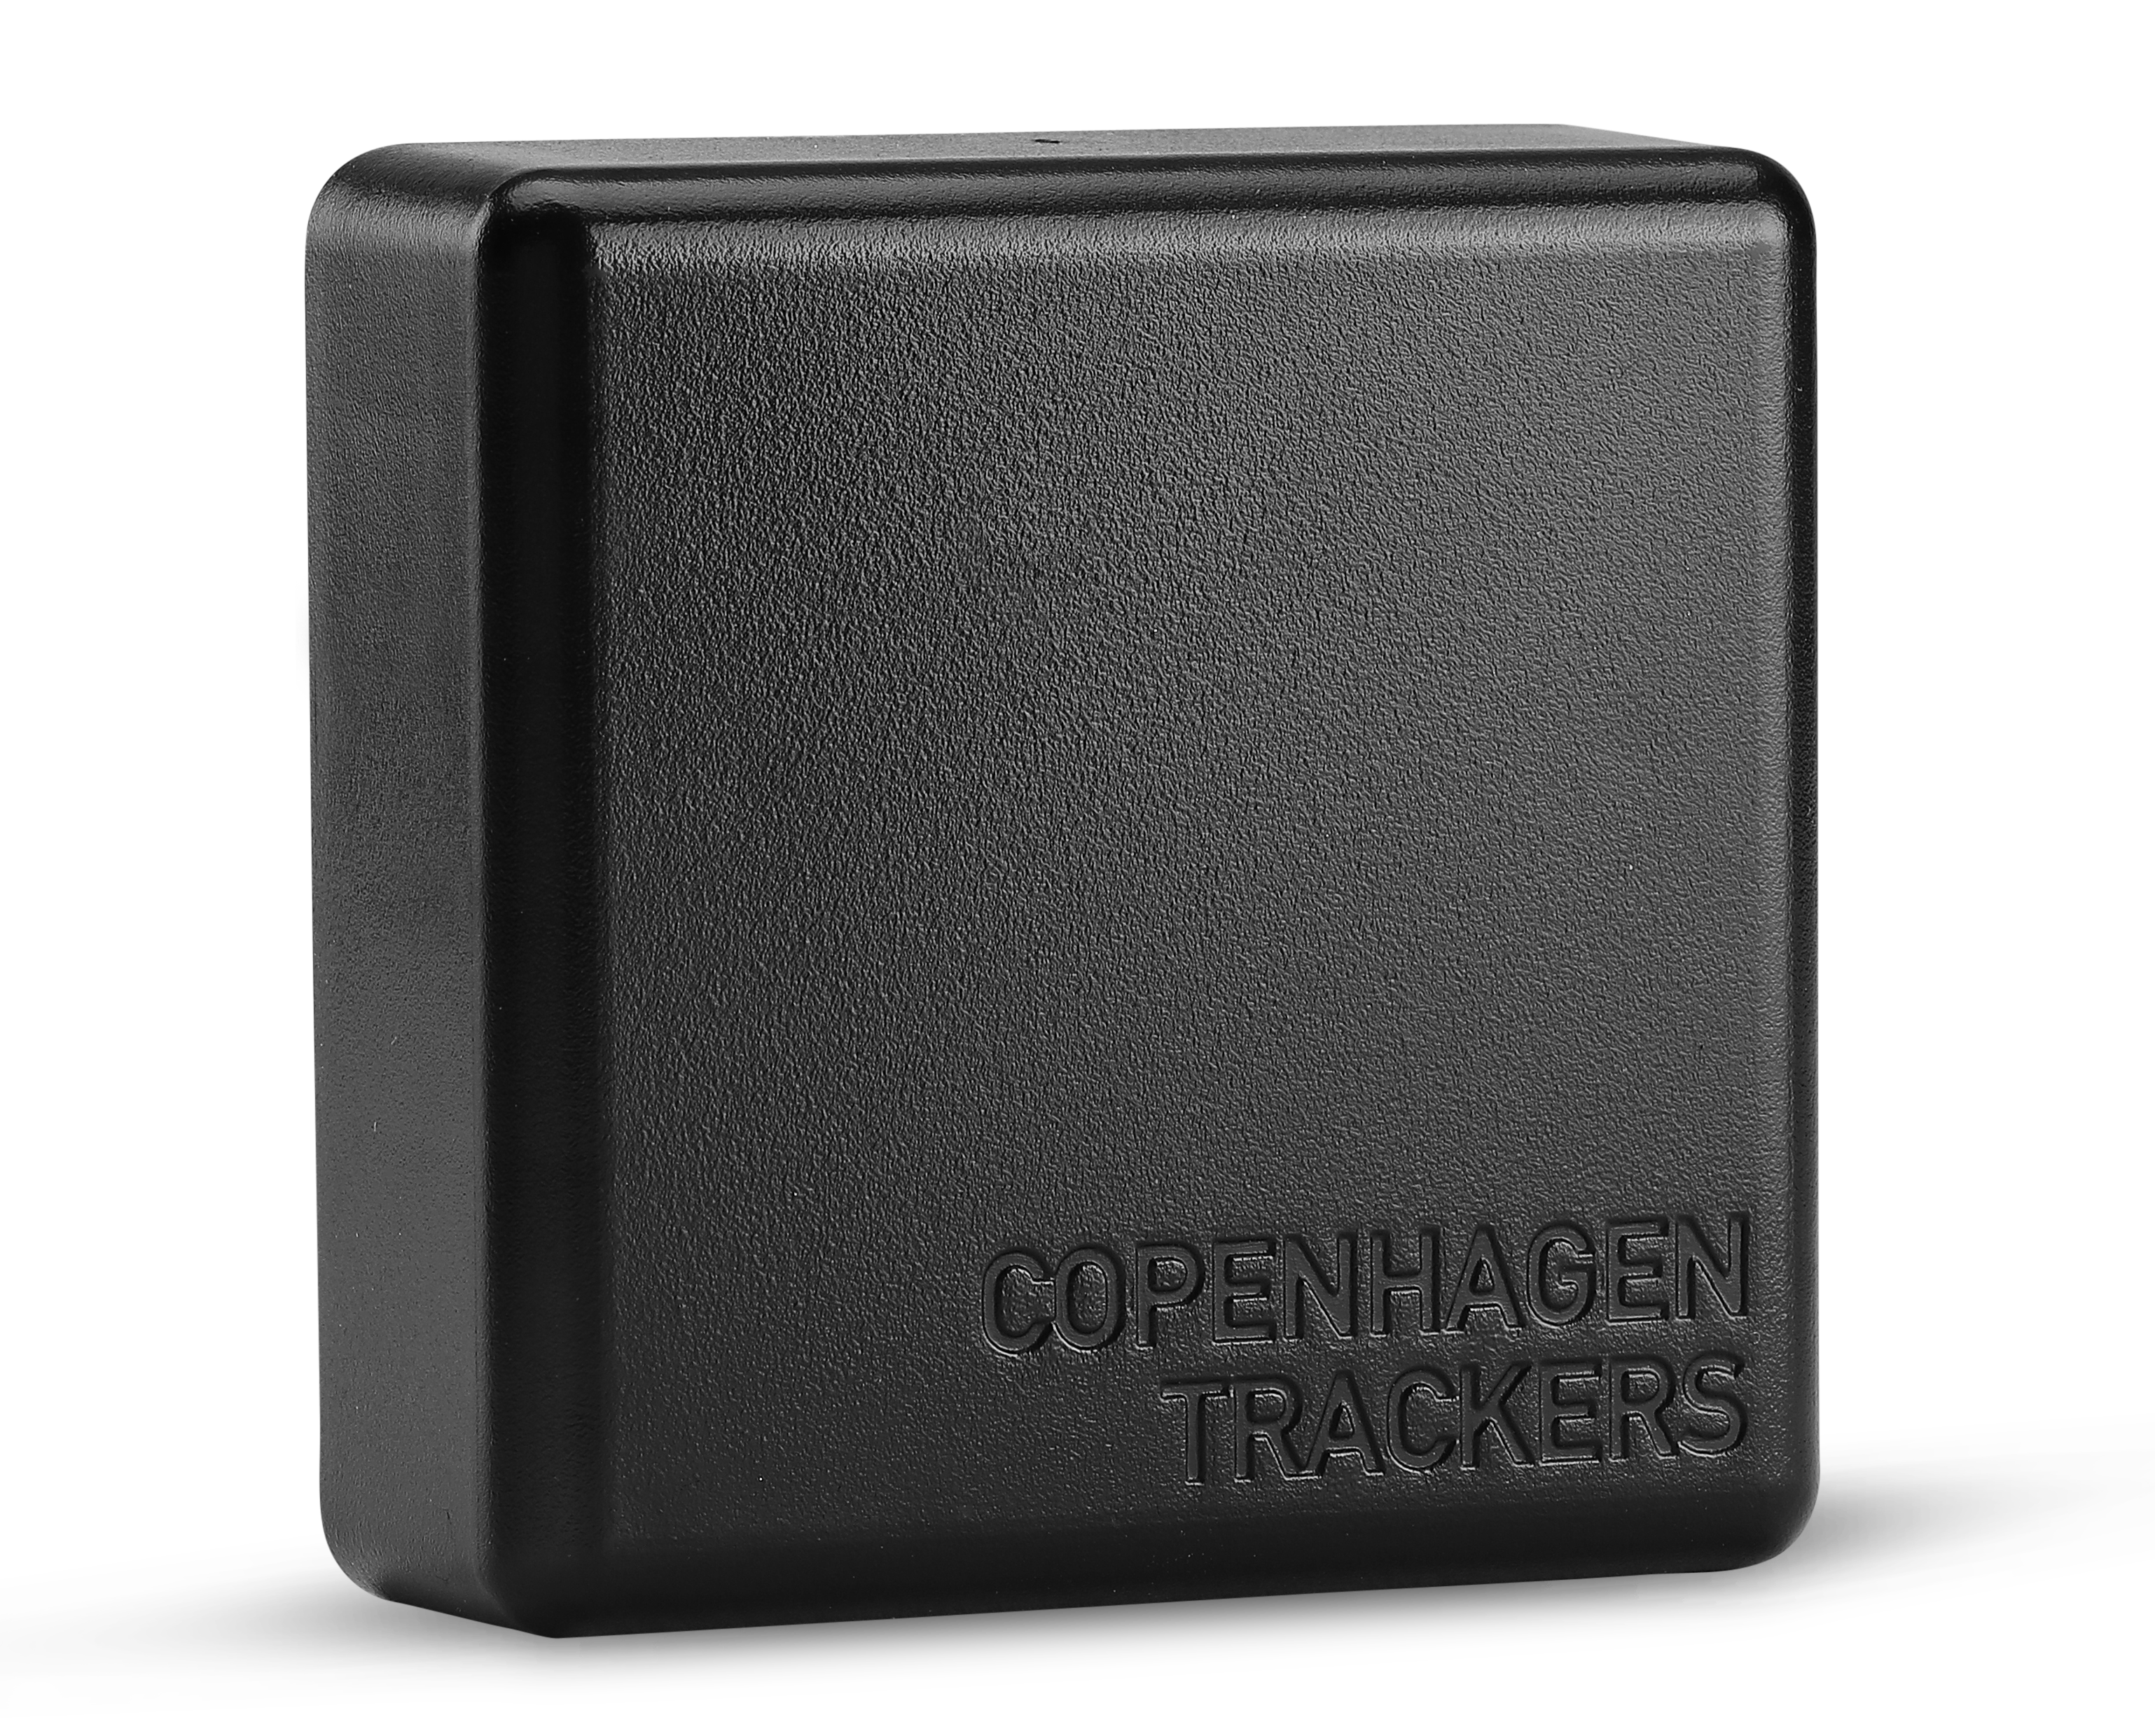 tilbede Kilde Automatisk Copenhagen Trackers - GPS trackers without subscription